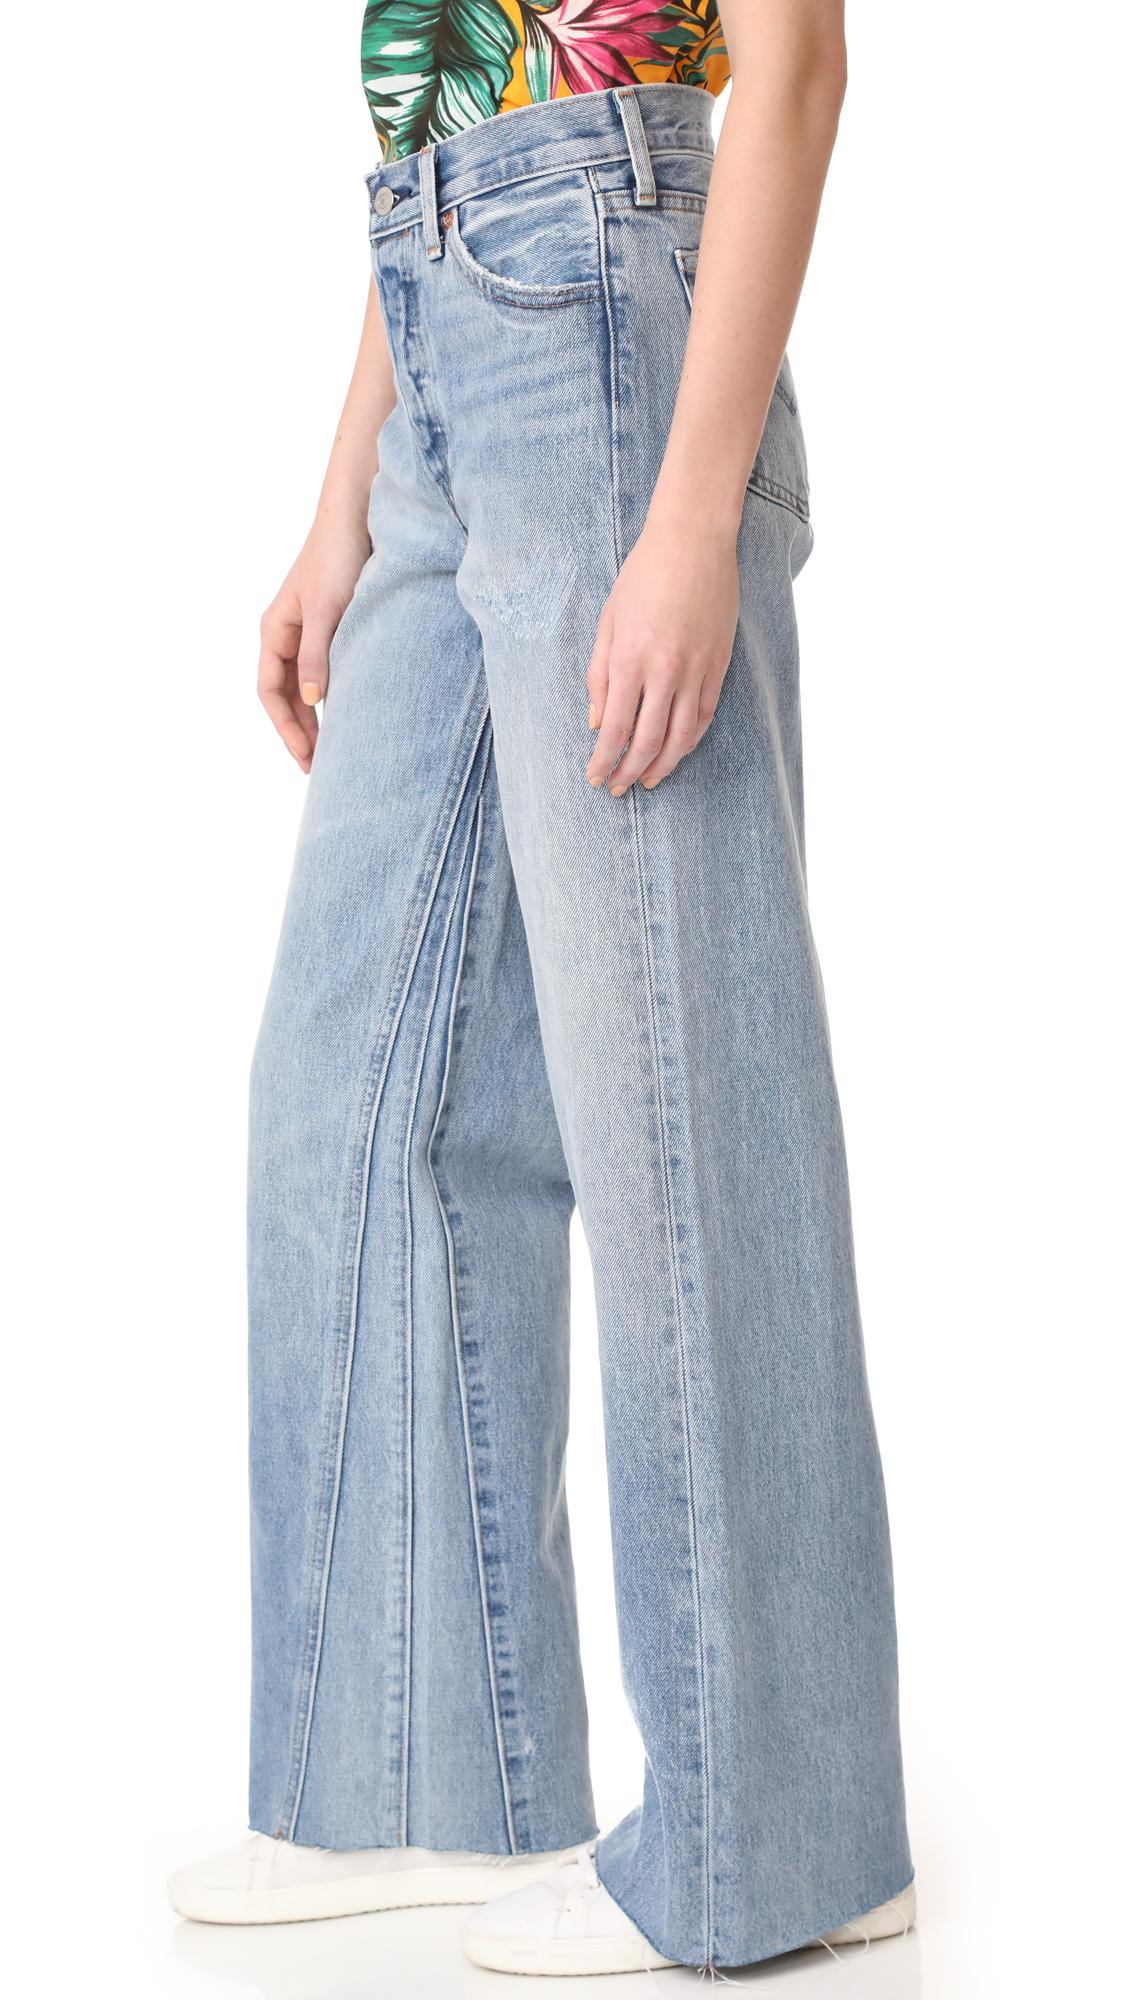 Lyst - Levi'S Altered Wide Leg Jeans in Blue